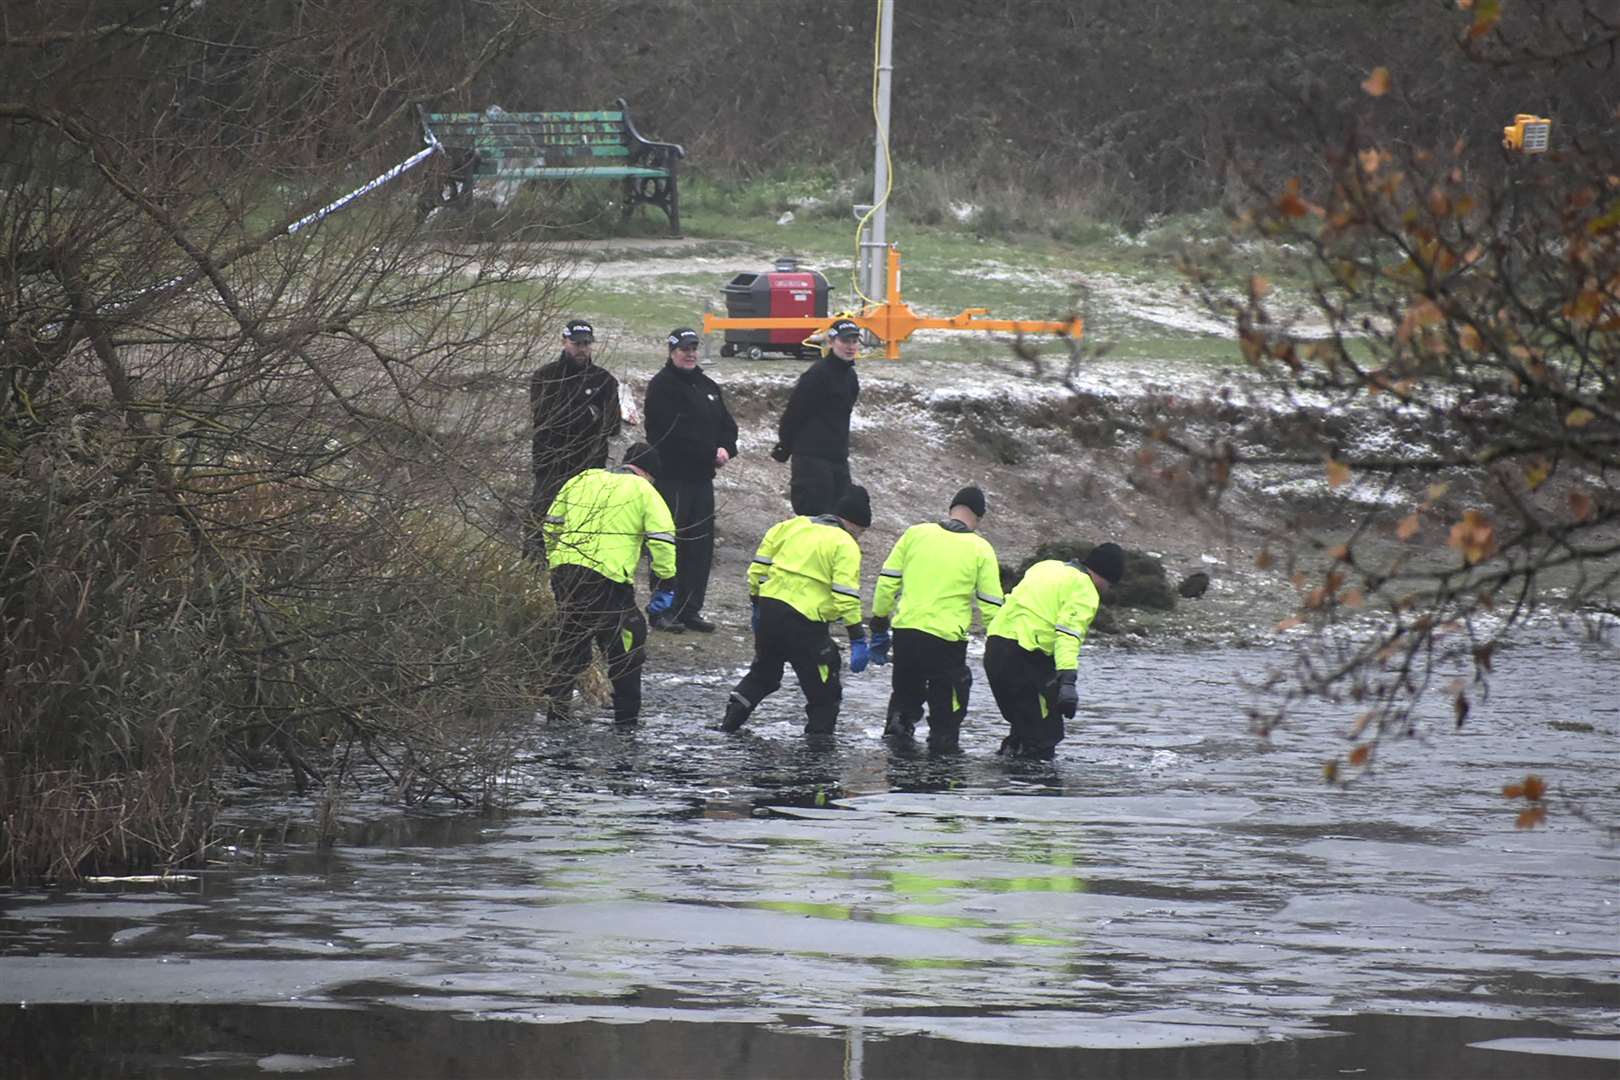 Police search teams at the scene in Kingshurst (Matthew Cooper/PA)